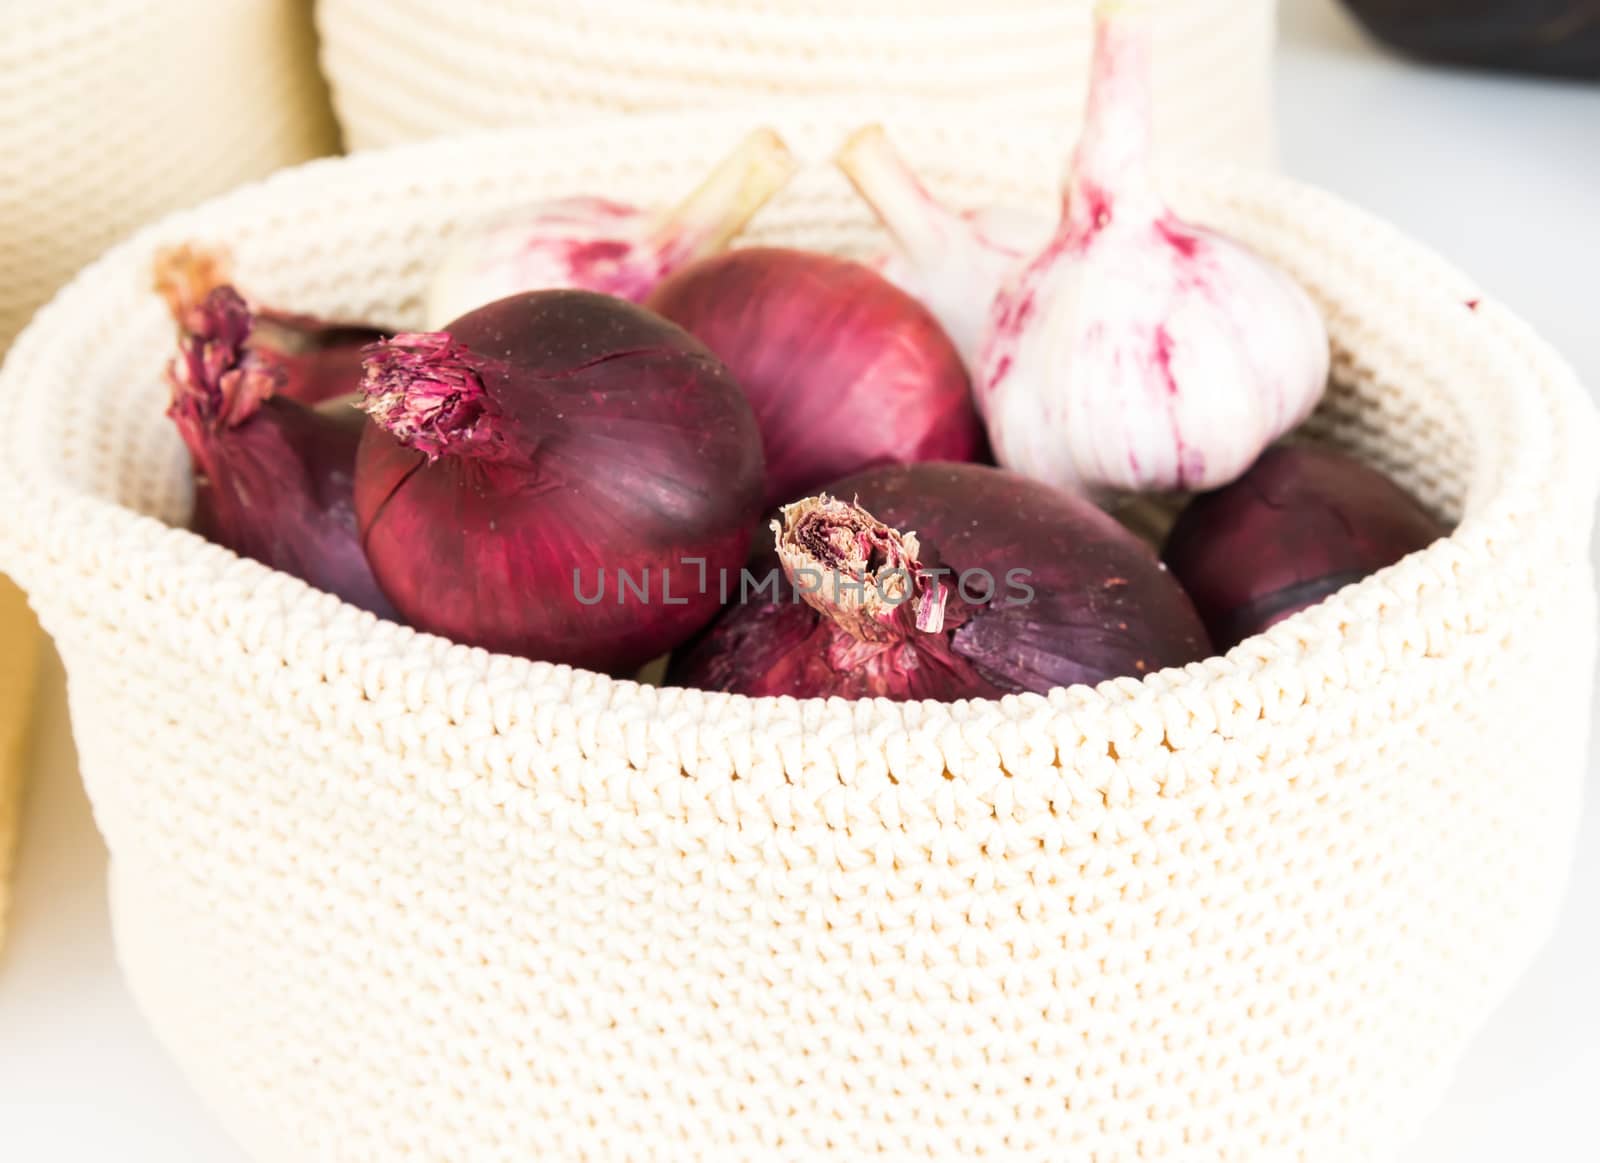 the red onions in a wicker basket close-up